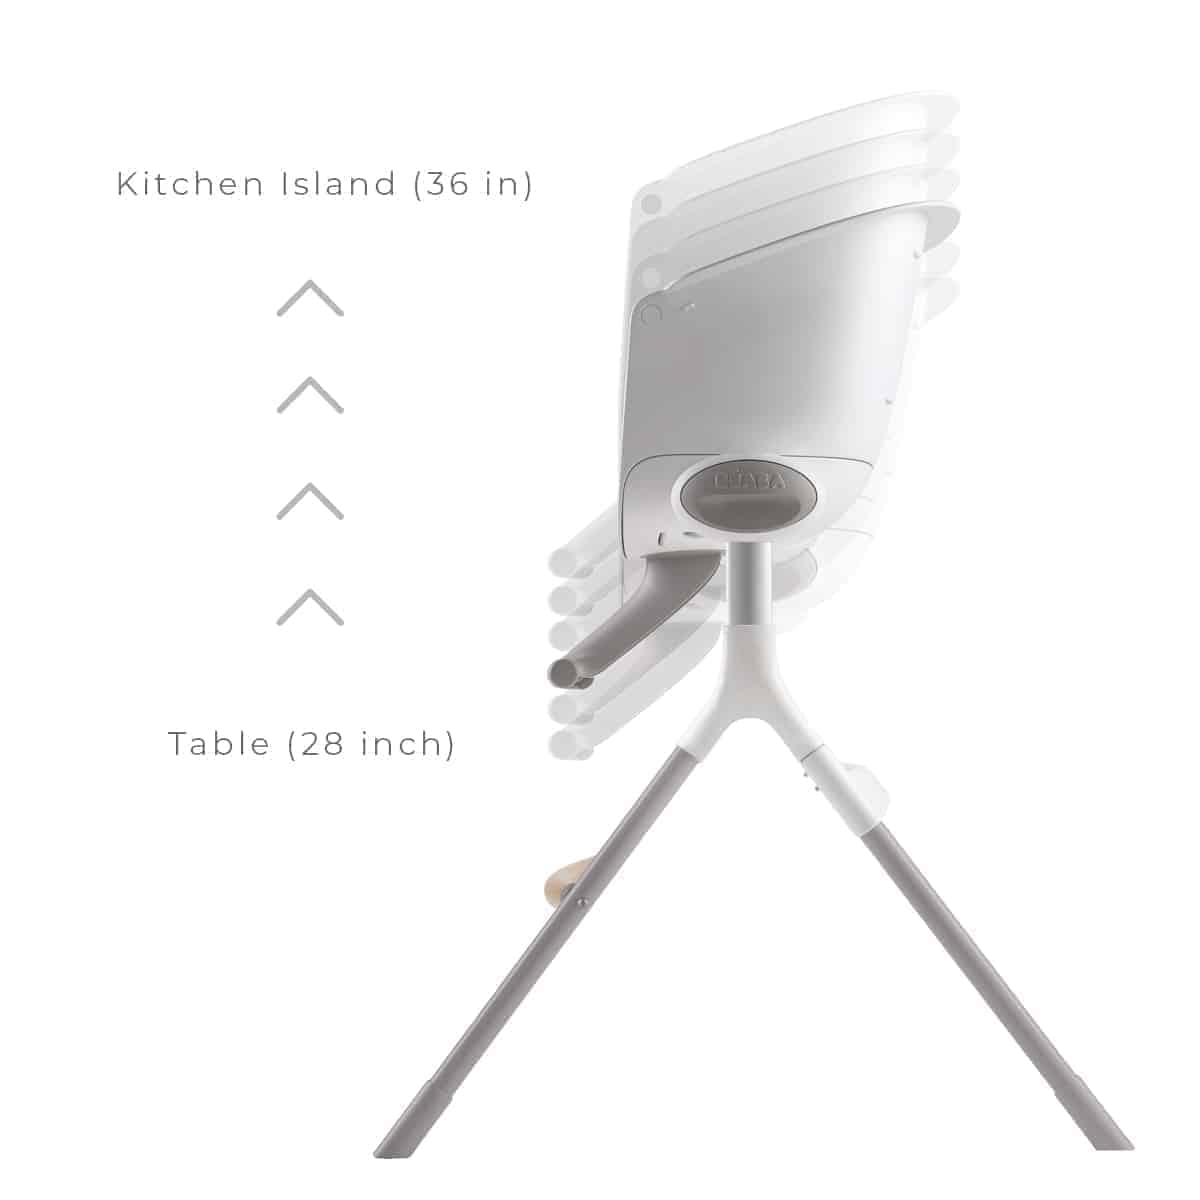 BEABA Up & Down High Chair can go from 28 inches to 36 inches